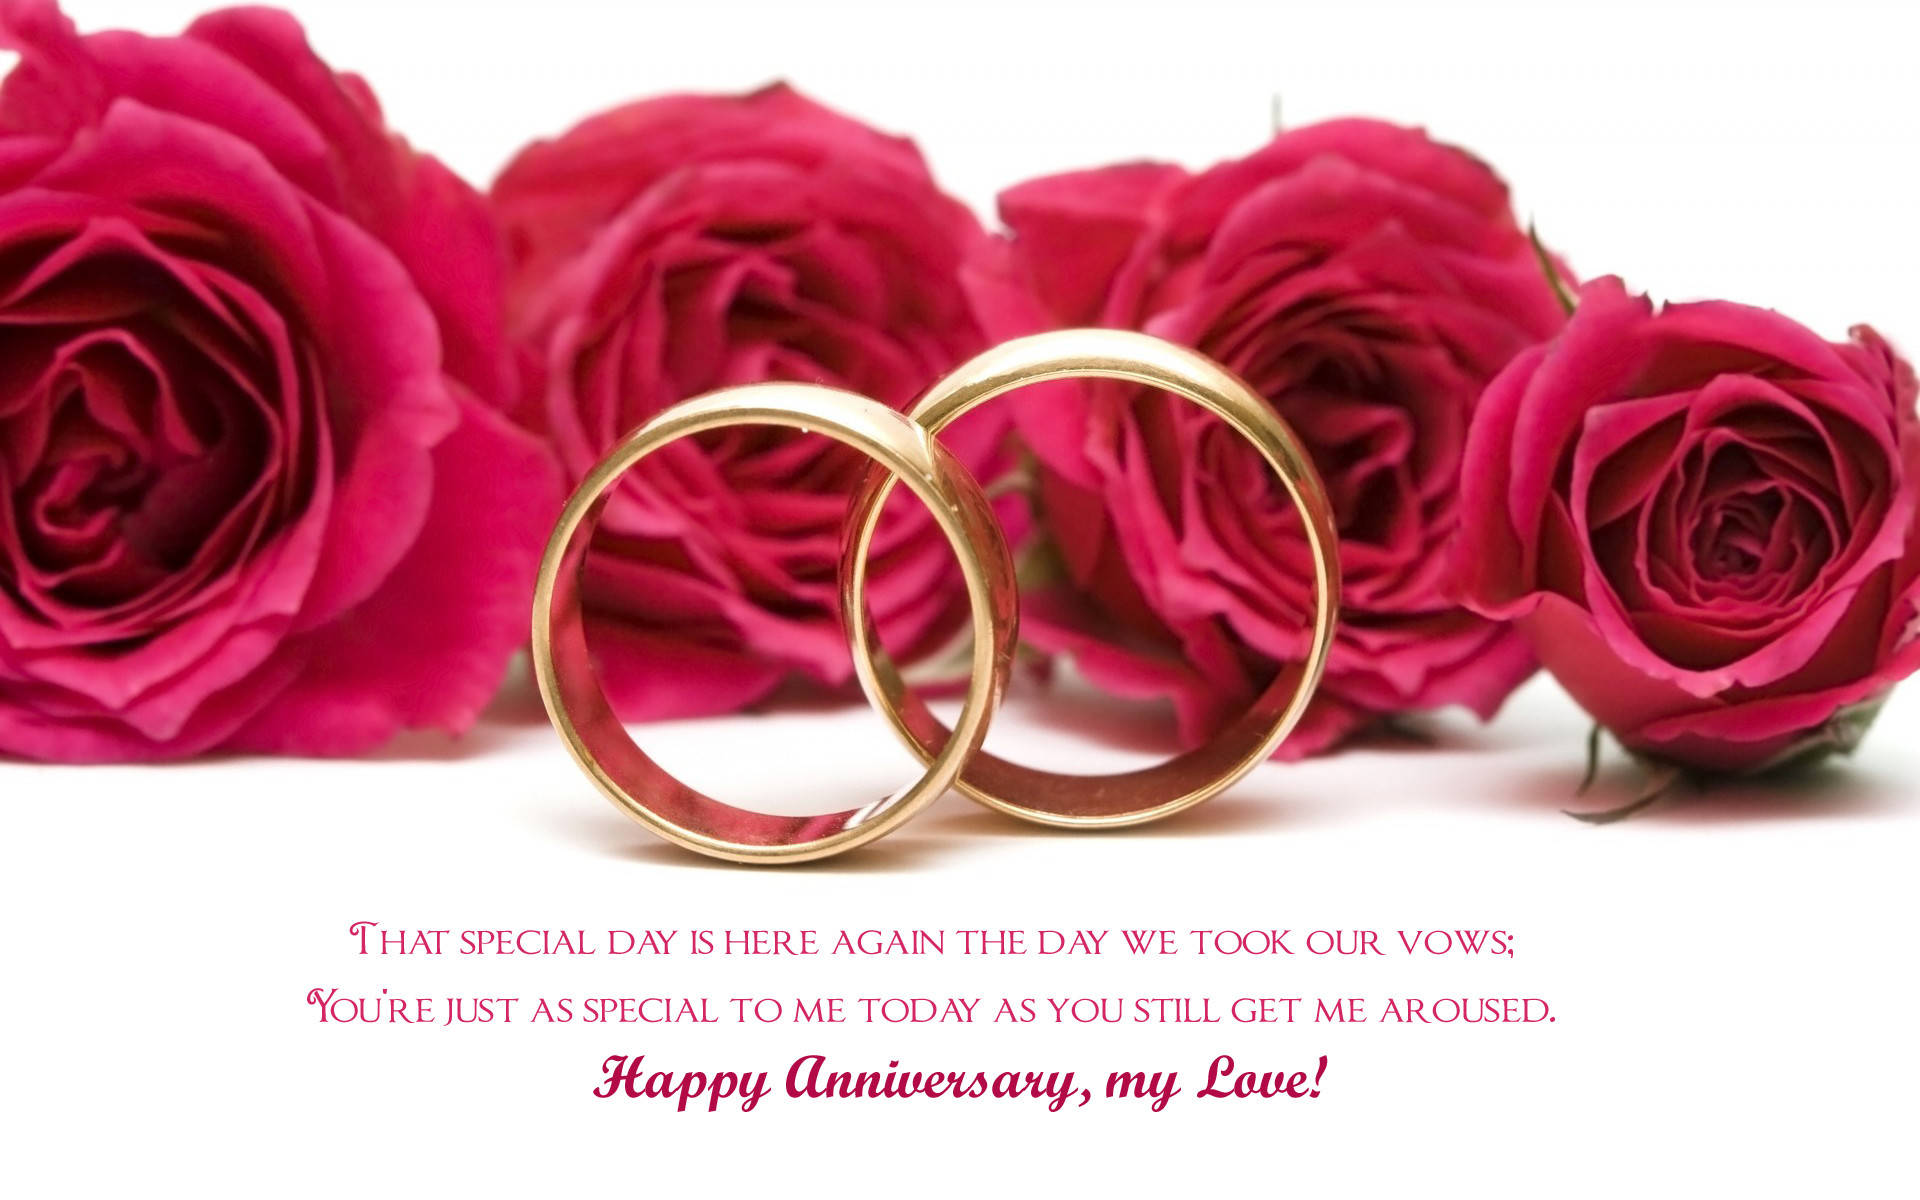 Happy Anniversary Gold Rings And Roses